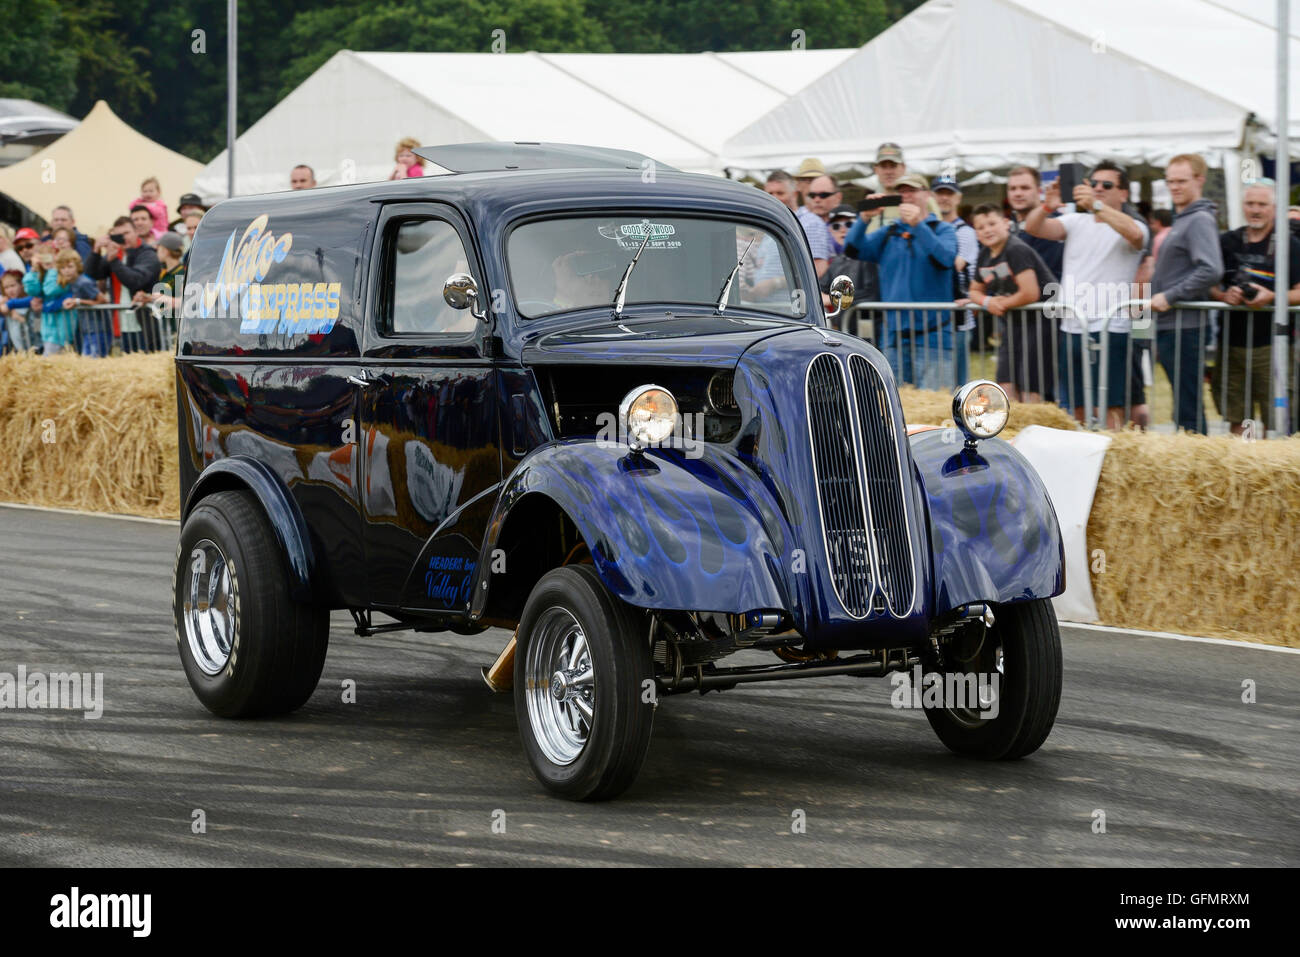 Carfest North, Bolesworth, Cheshire, UK. 31st July 2016. An American Hot Rod taking to the track. The event is the brainchild of Chris Evans and features 3 days of cars, music and entertainment with profits being donated to the charity Children in Need. Andrew Paterson/Alamy Live News Stock Photo